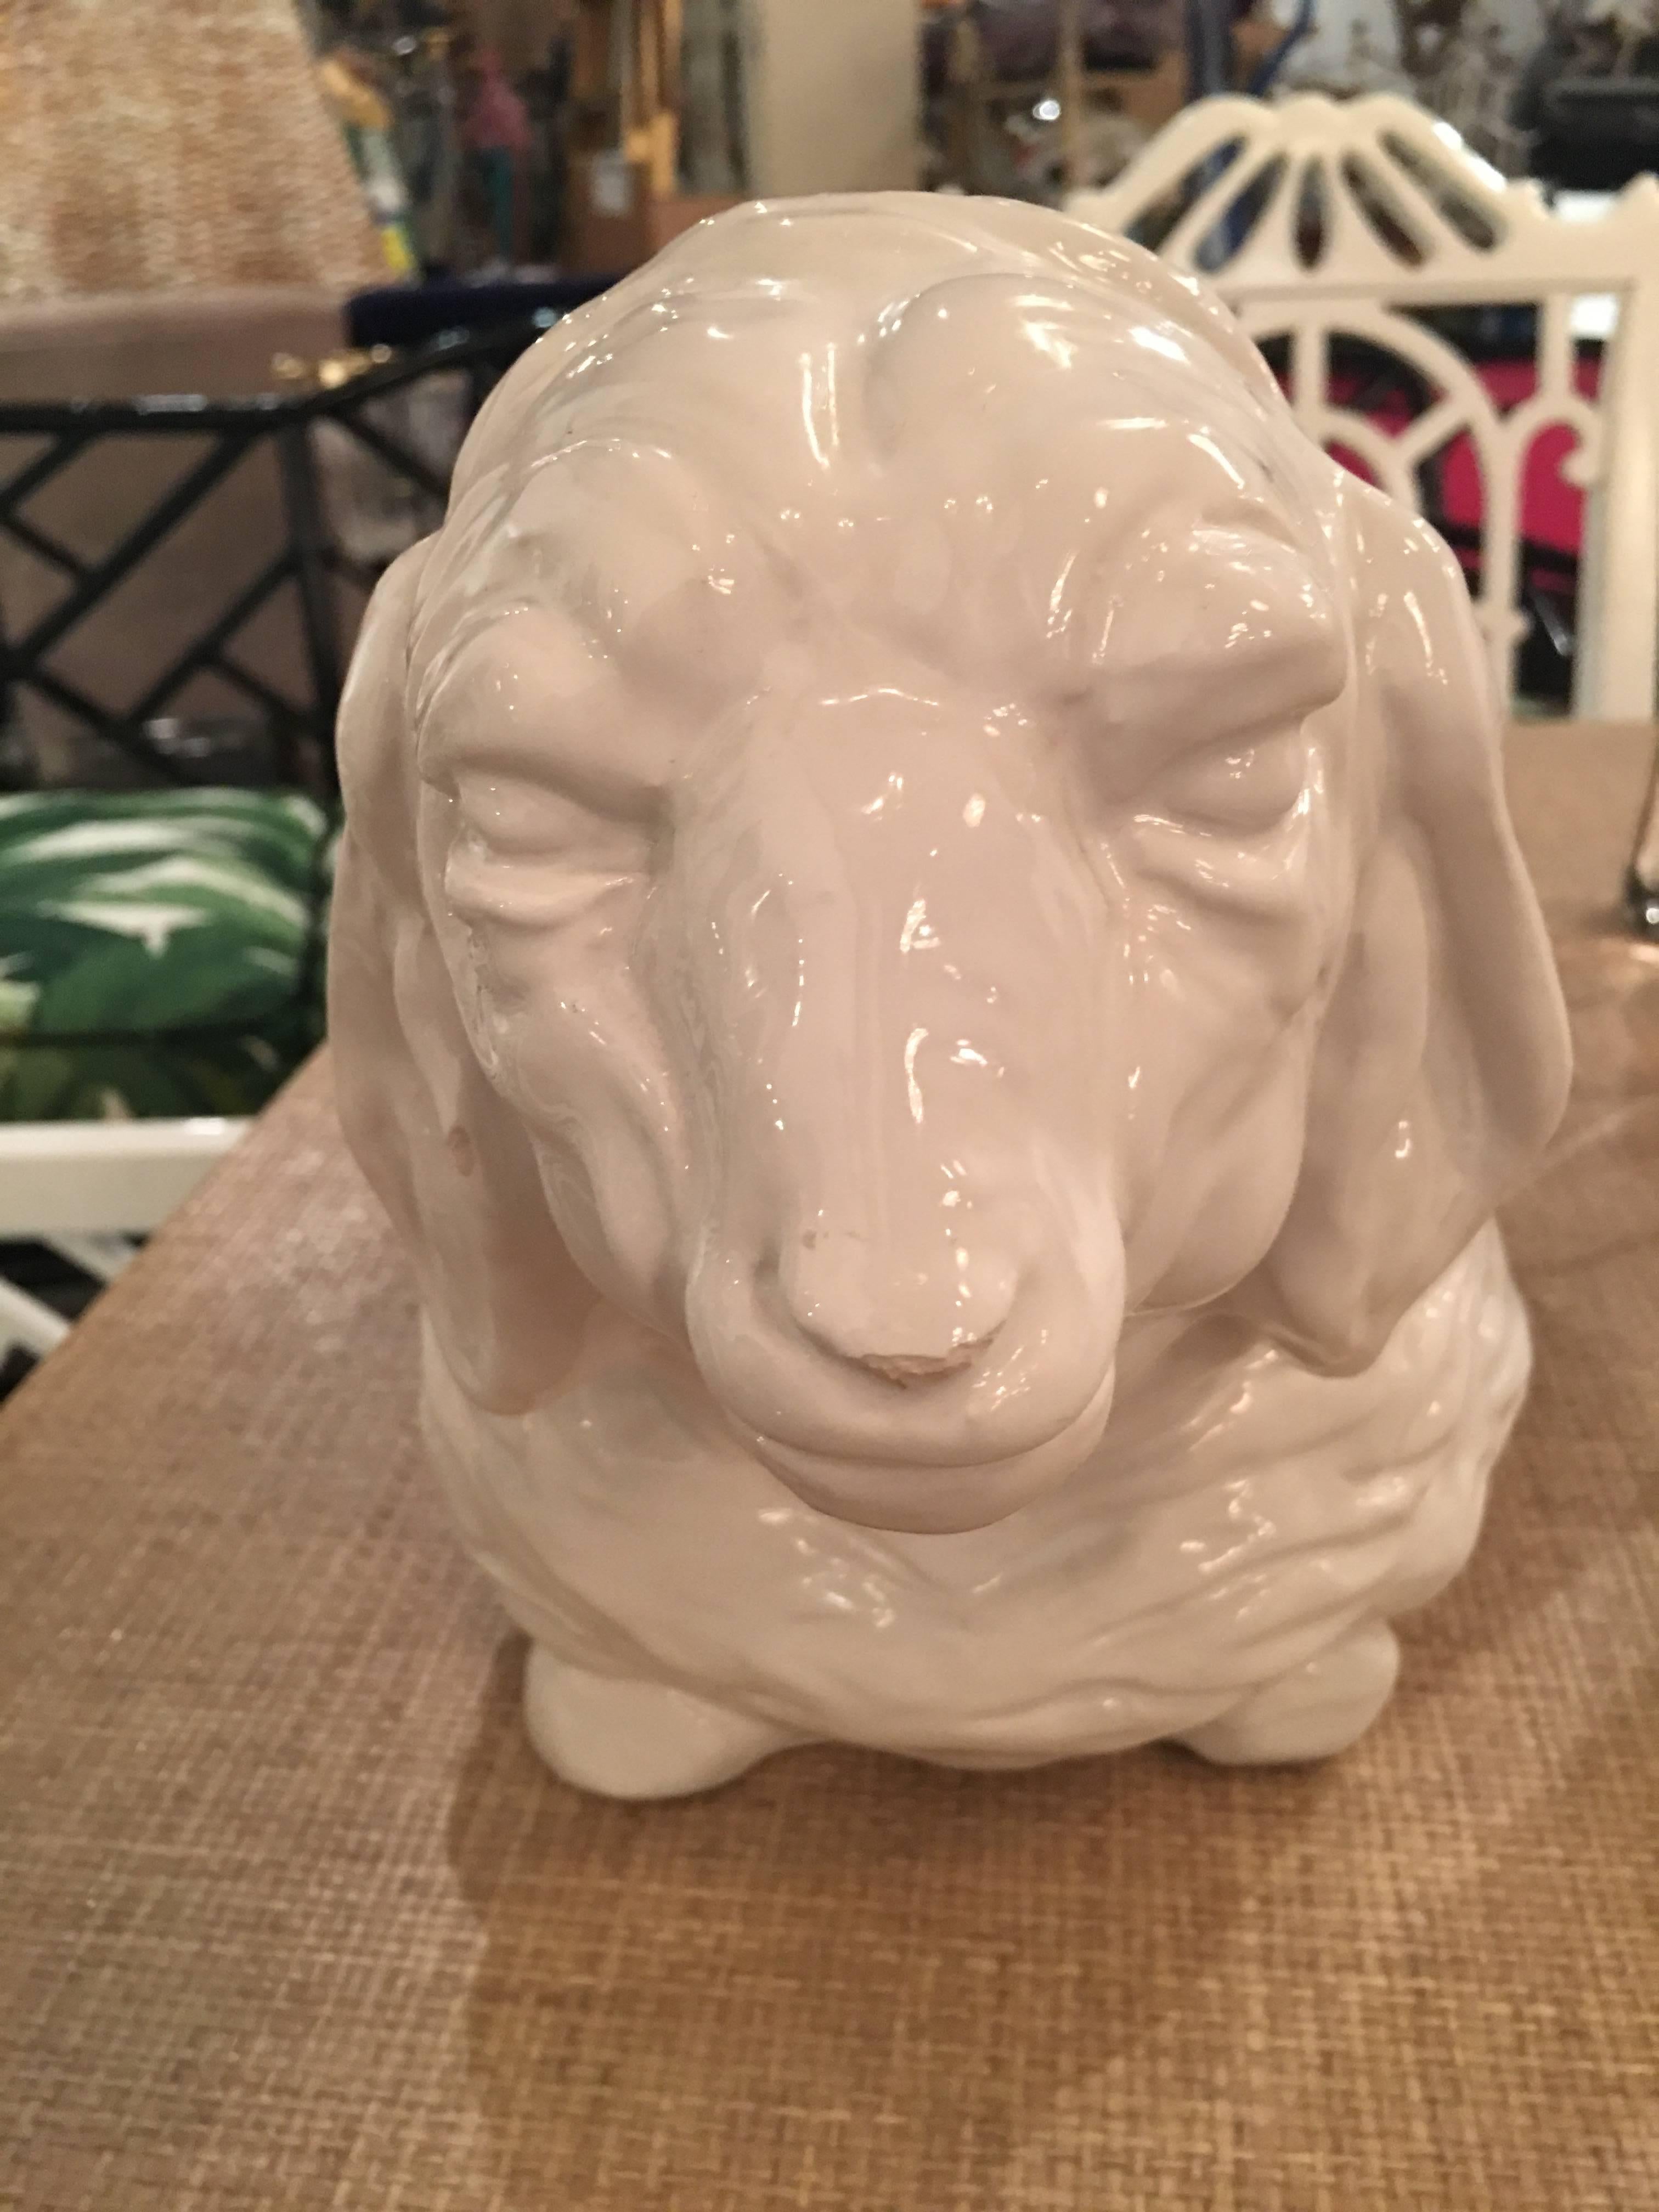 Vintage white ceramic lamb or sheep plant pot, planter. Made in Italy. No chips or breaks.